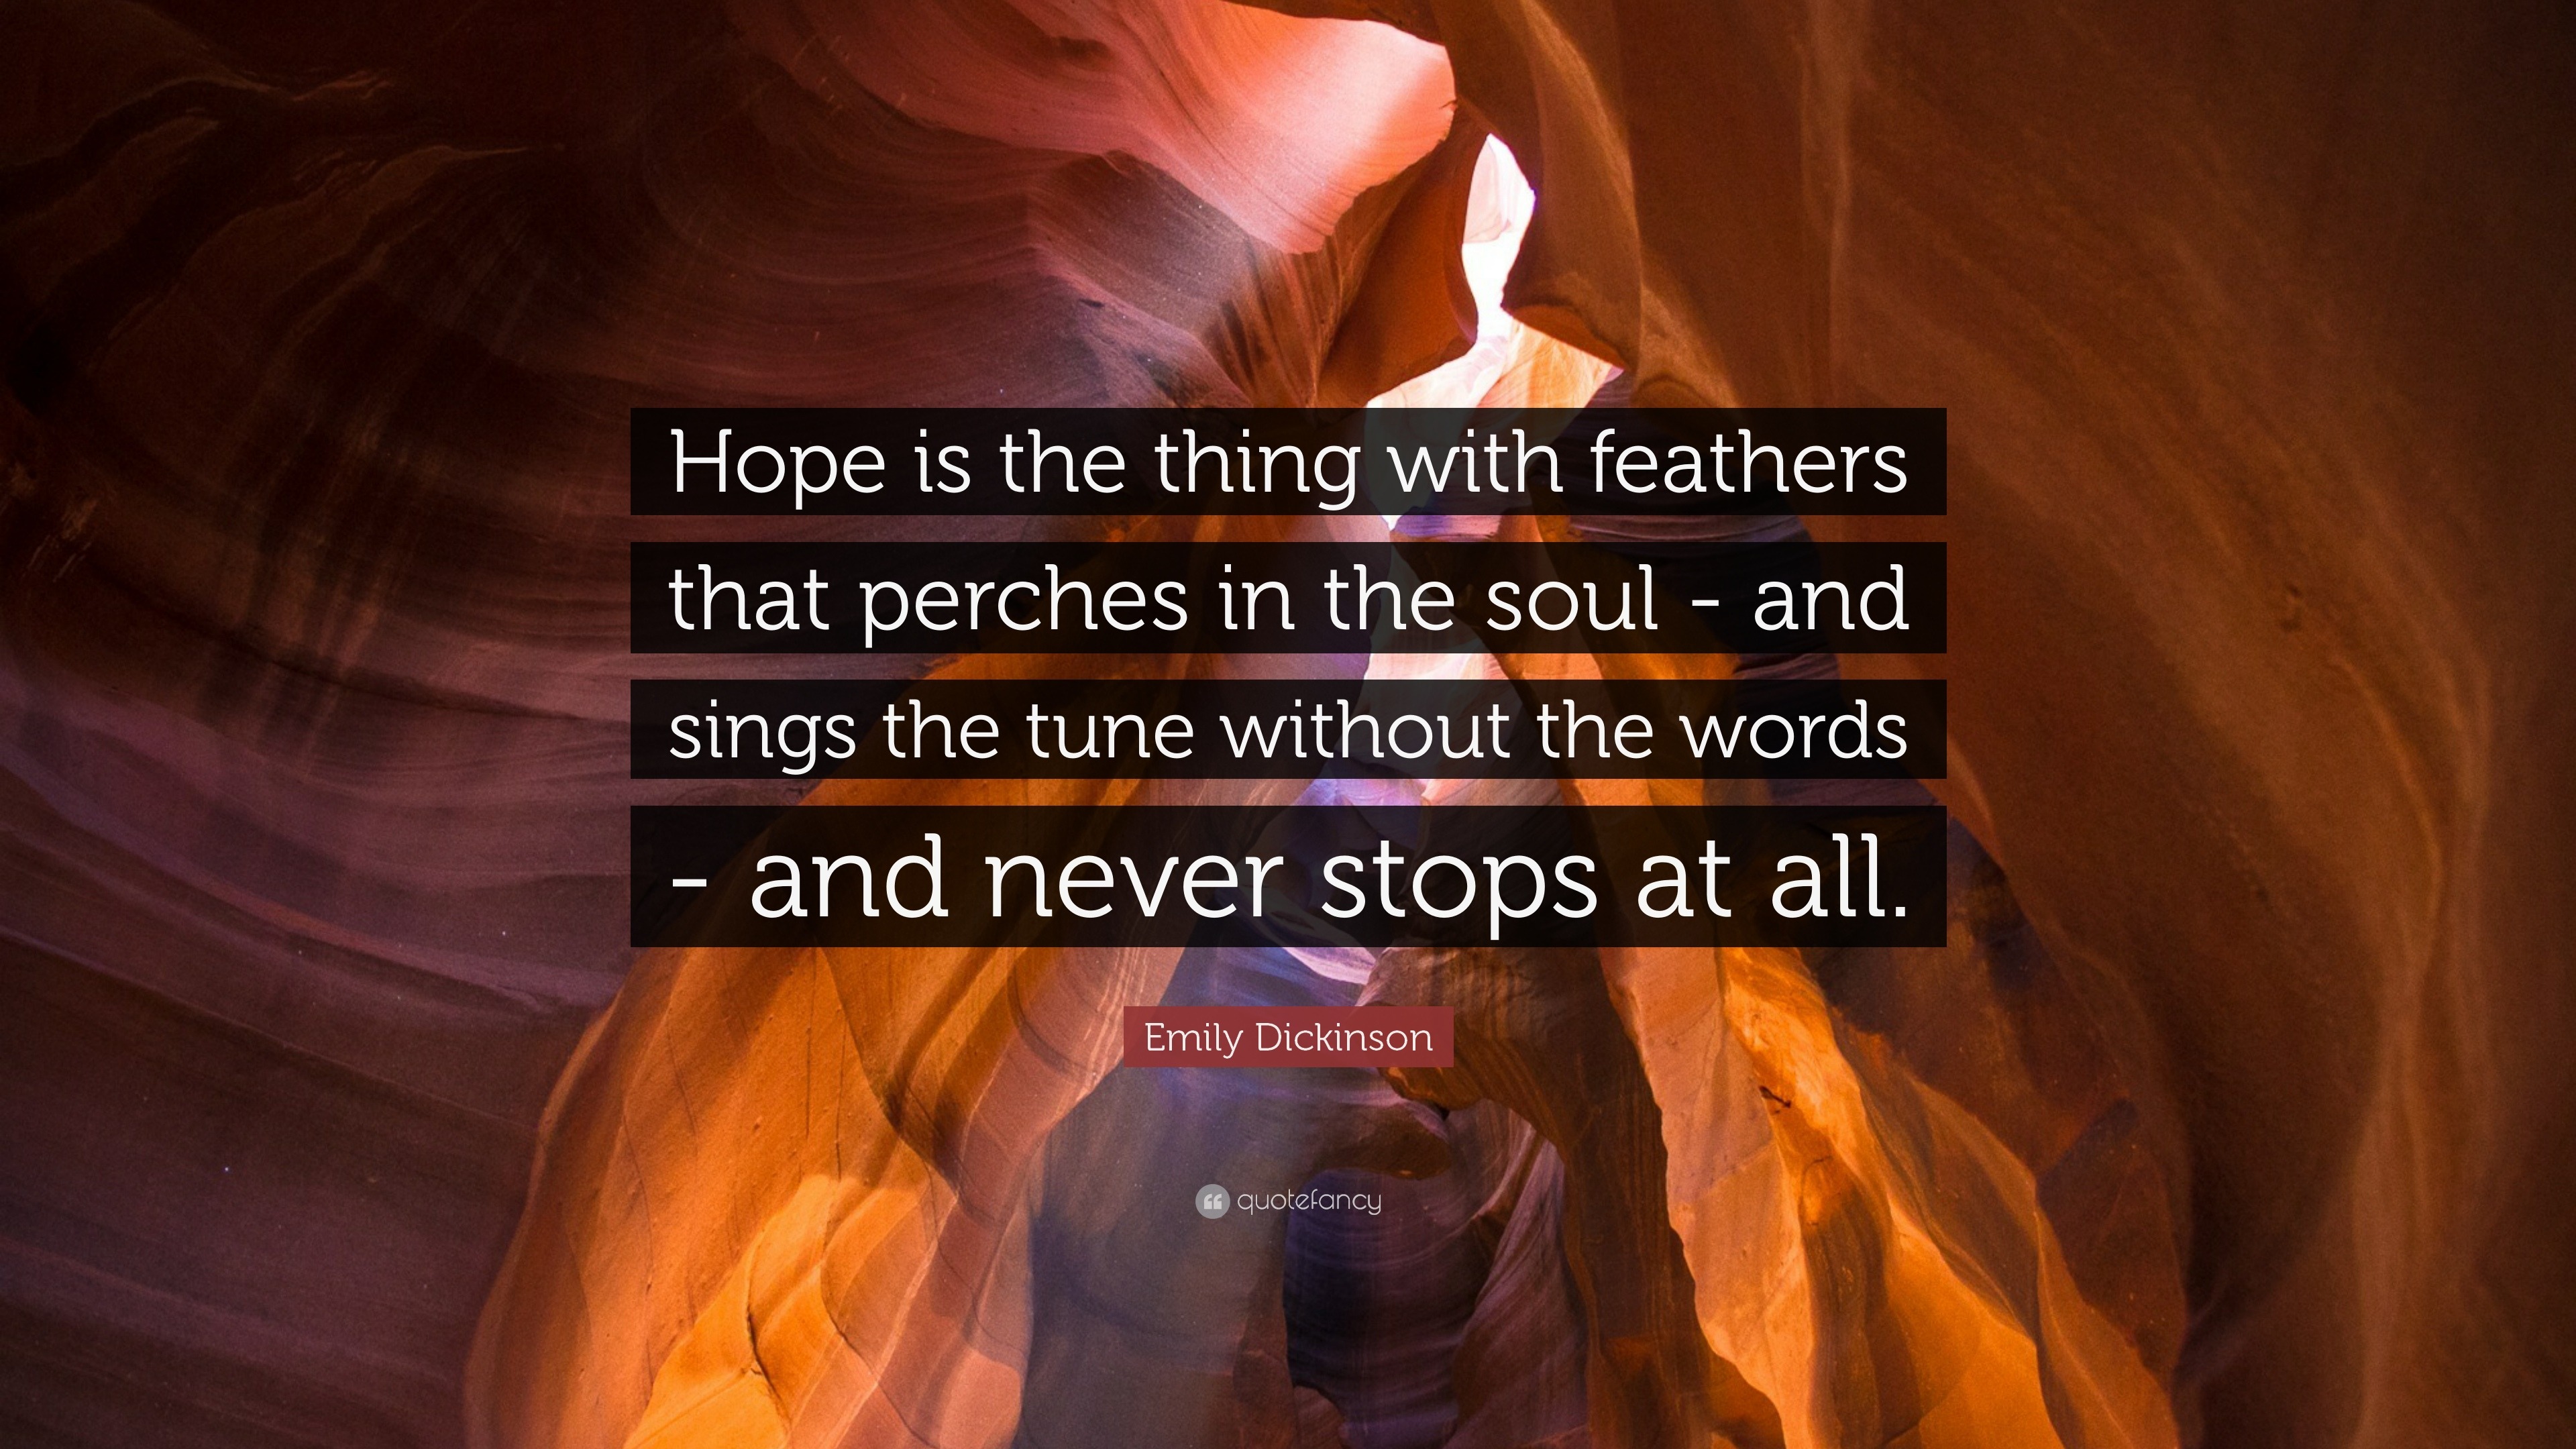 Hope Is the Thing With Feathers by Emily Dickinson